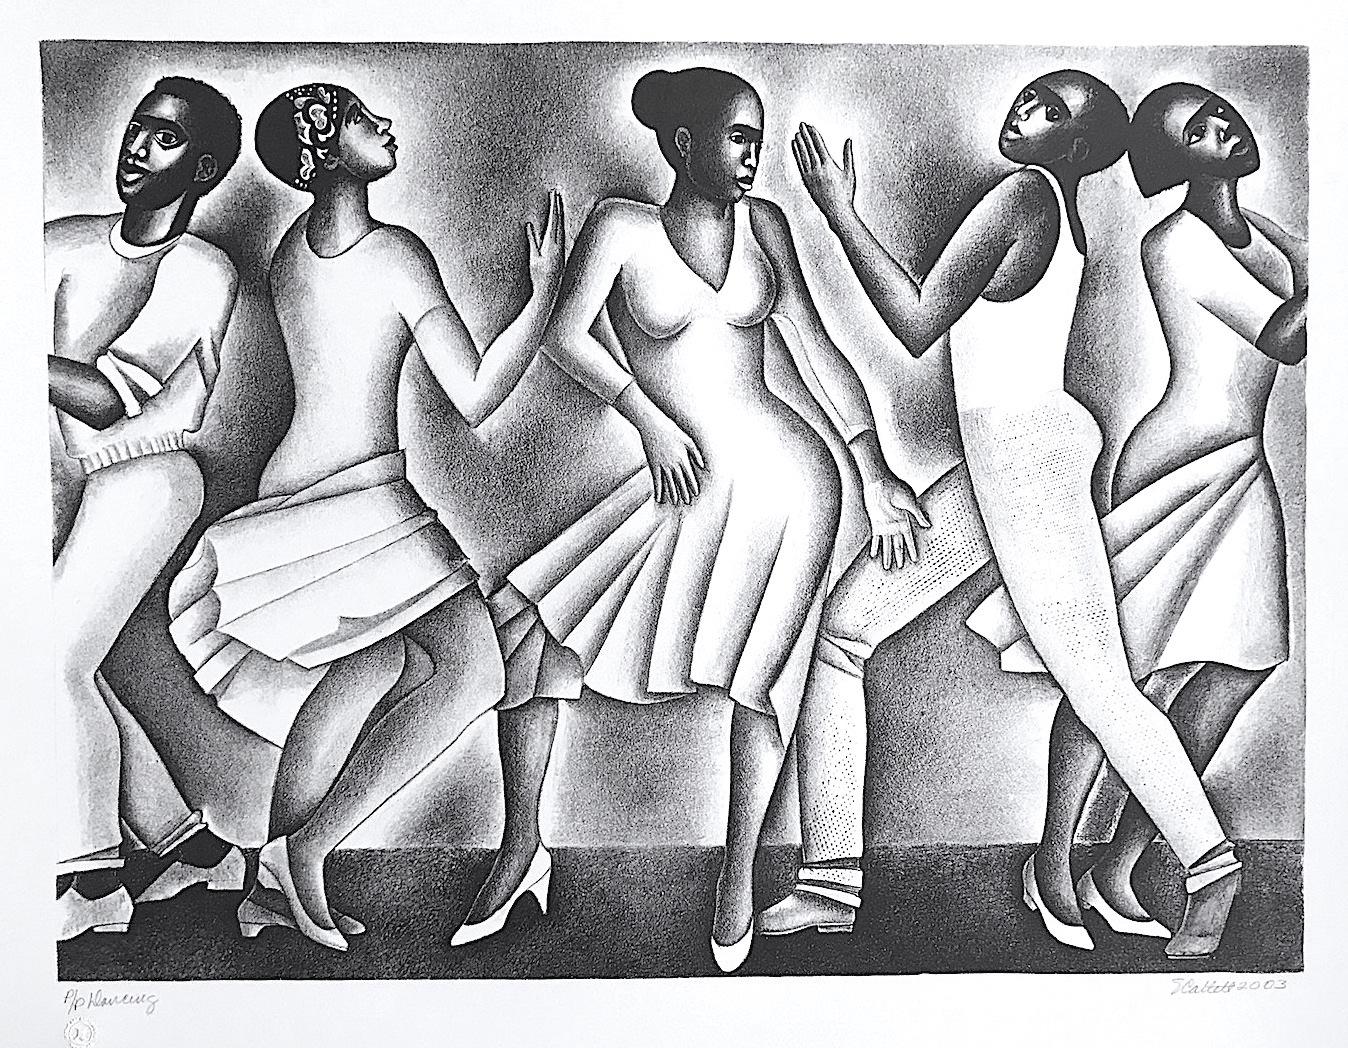 DANCING II, Signed Lithograph, Black and White Dance Portrait, Black Culture